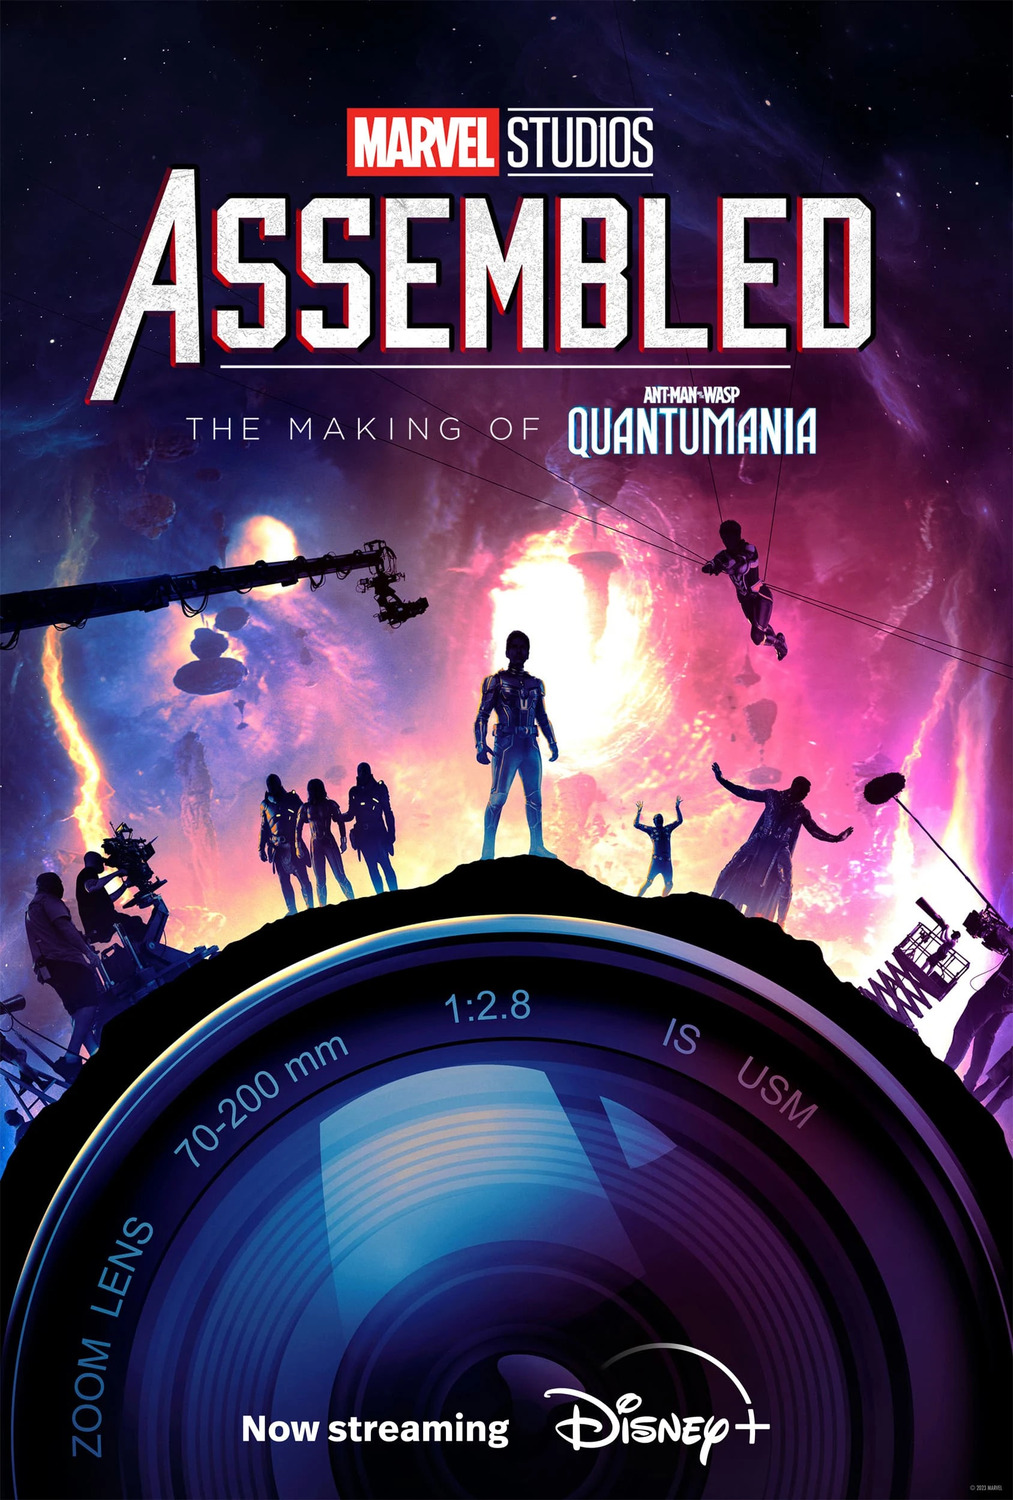 Extra Large TV Poster Image for Marvel Studios: Assembled (#15 of 20)